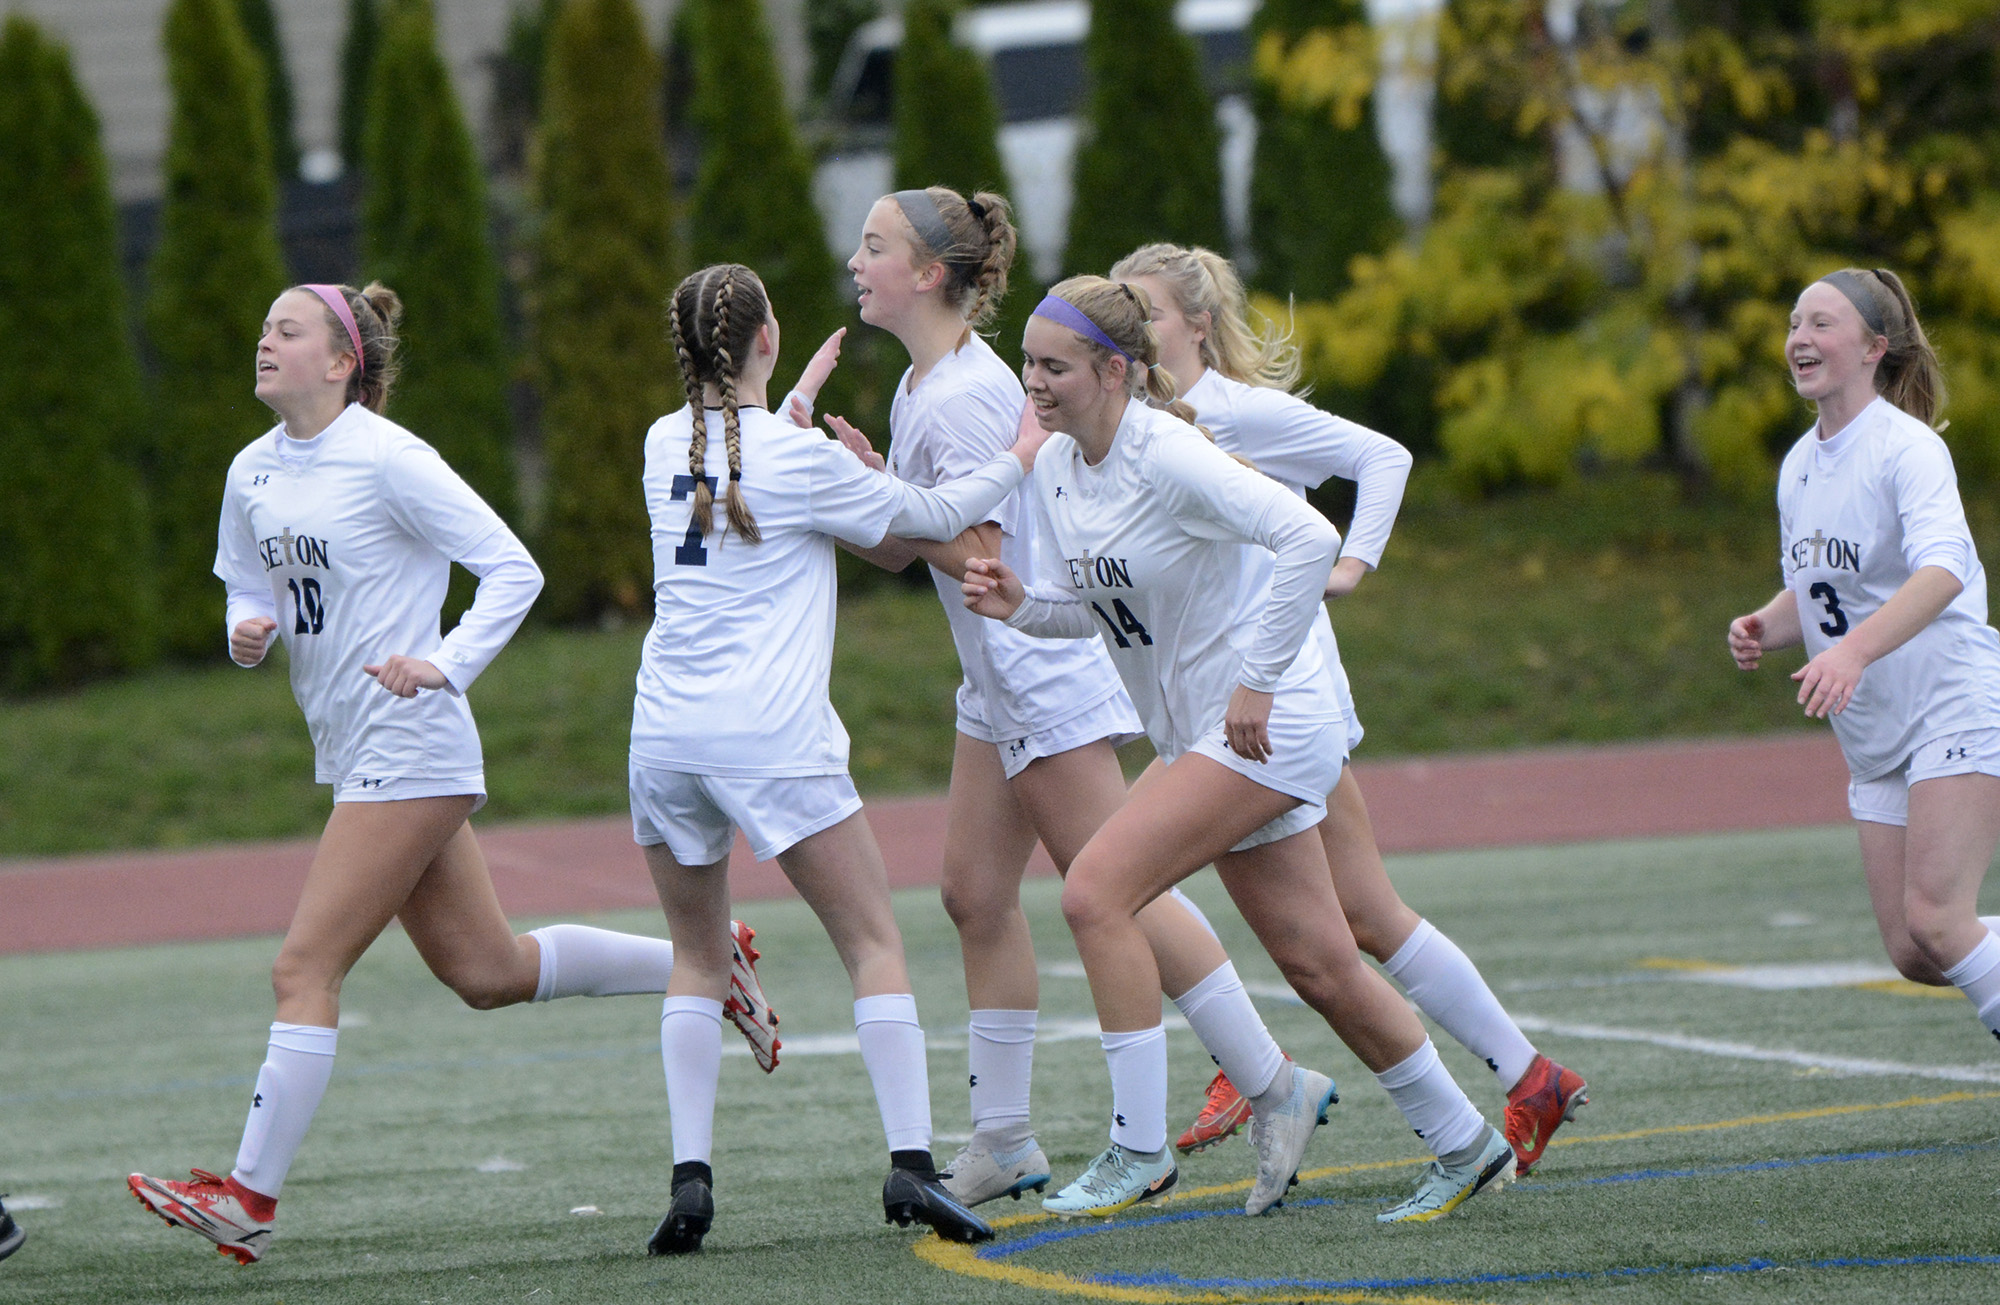 Seton Catholic's Hailey Herboth (center) is congratulated by her teammates after scoring a goal in a 4-1 win over La Center during the 1A girls soccer district third-place match at King's Way Christian High School on Saturday, Nov. 5, 2022.